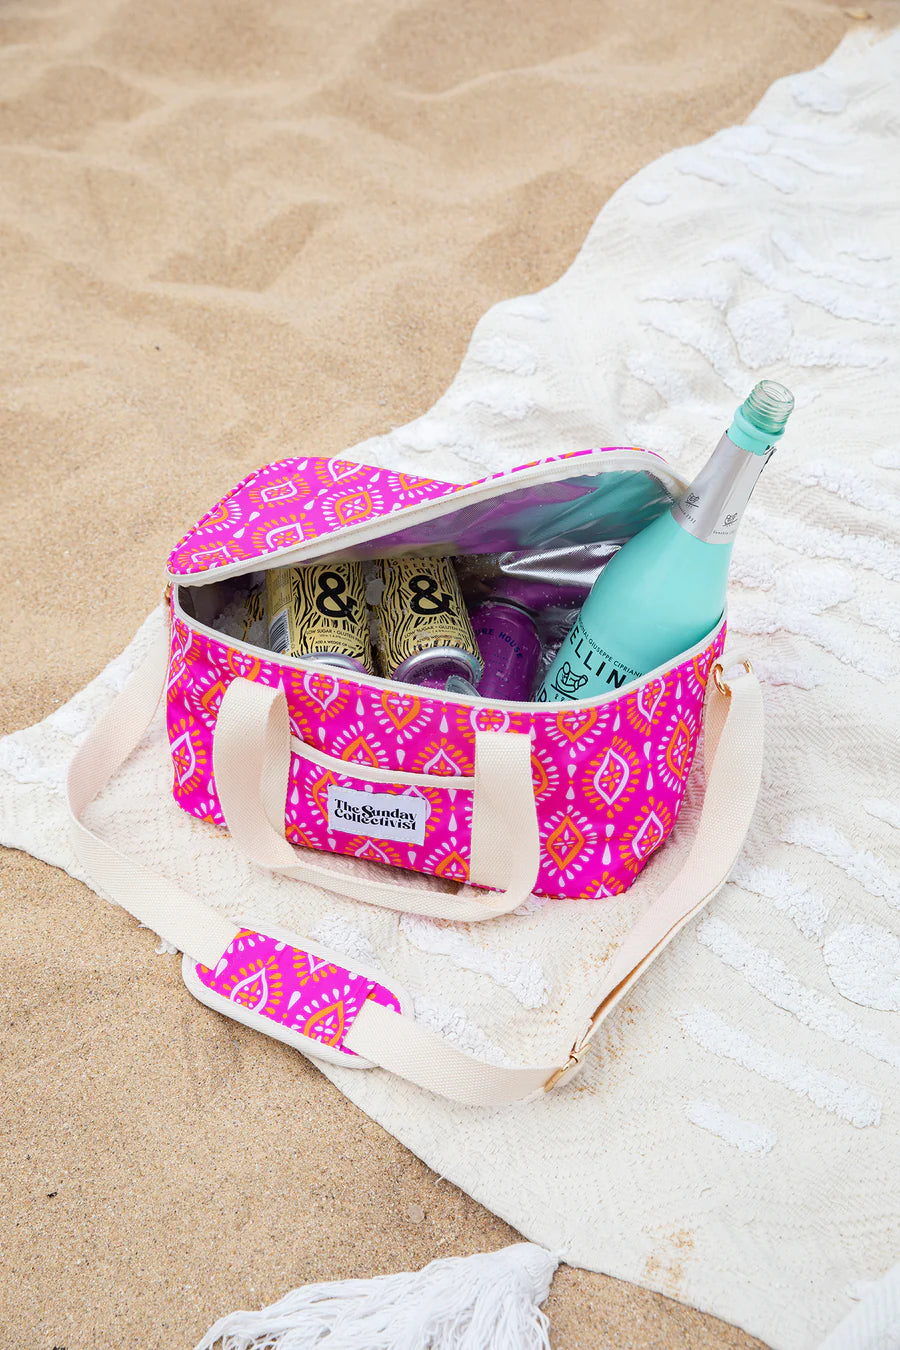 luna cooler bag by the sunday collectivist in hot pink at the beach sand